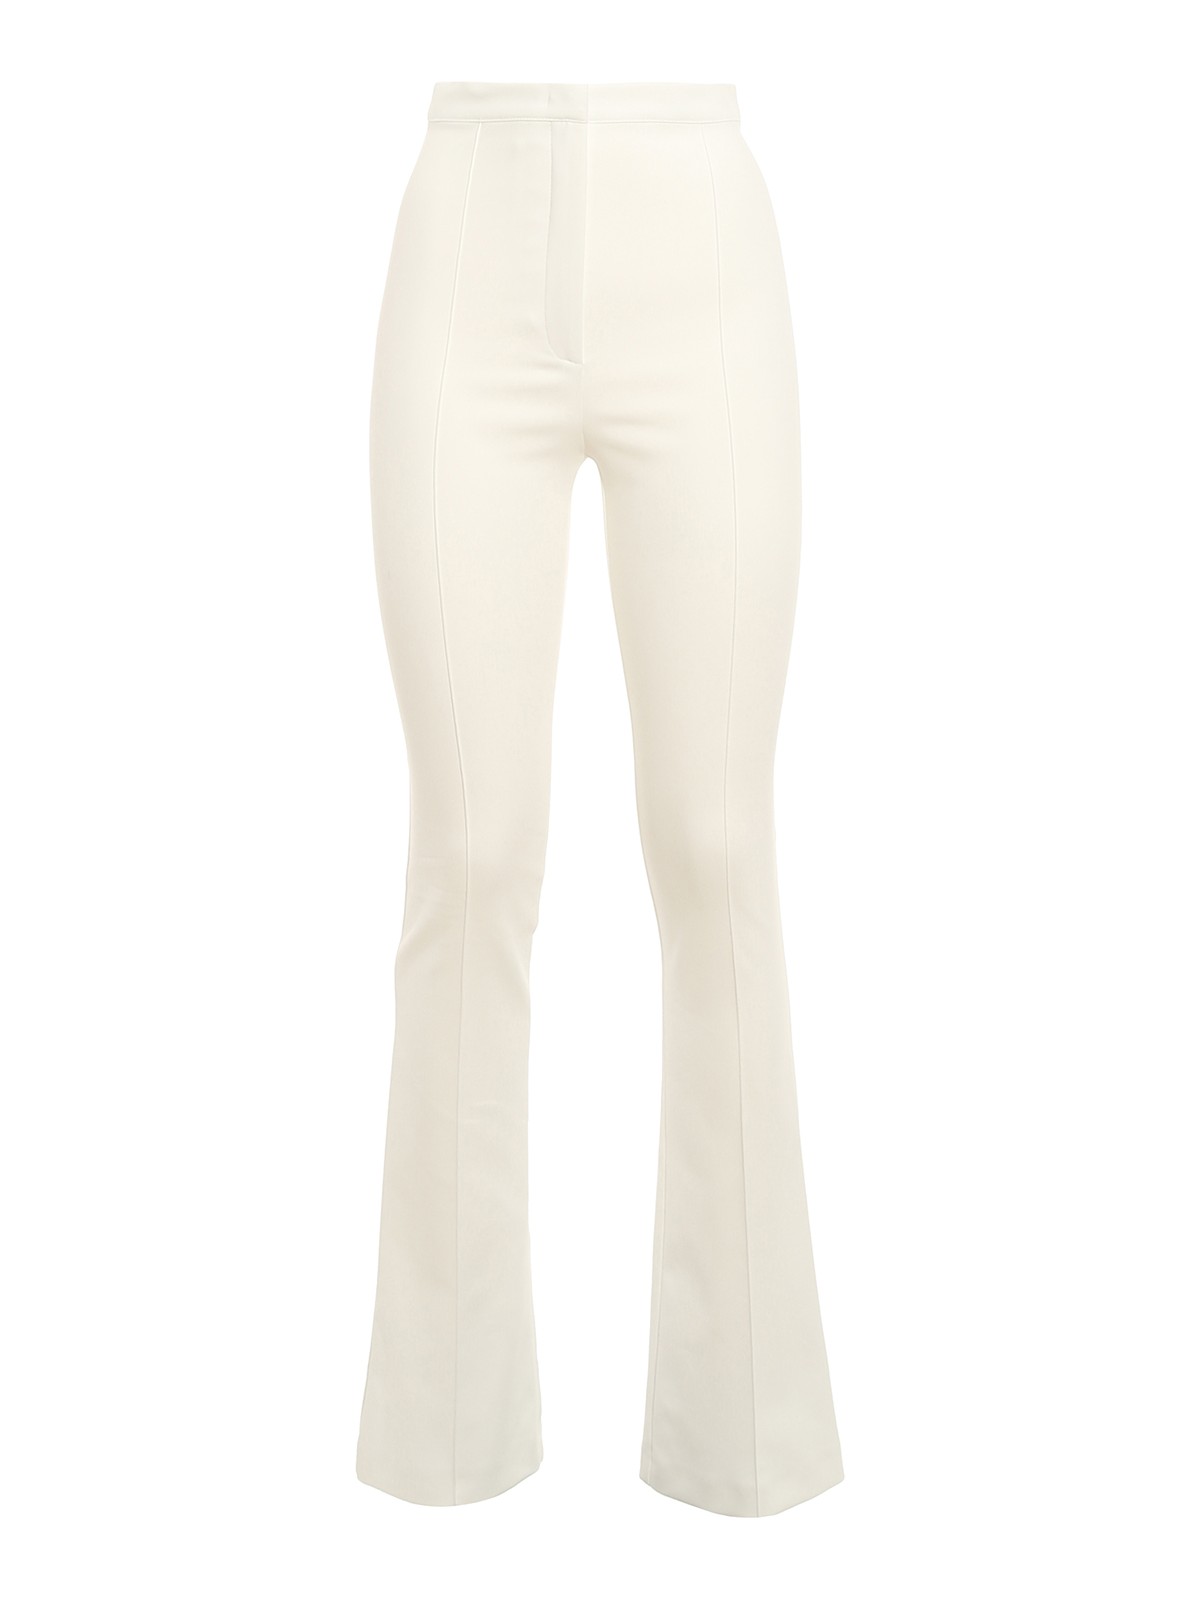 Patrizia Pepe Stretch Cotton Blend Flared Trousers In White